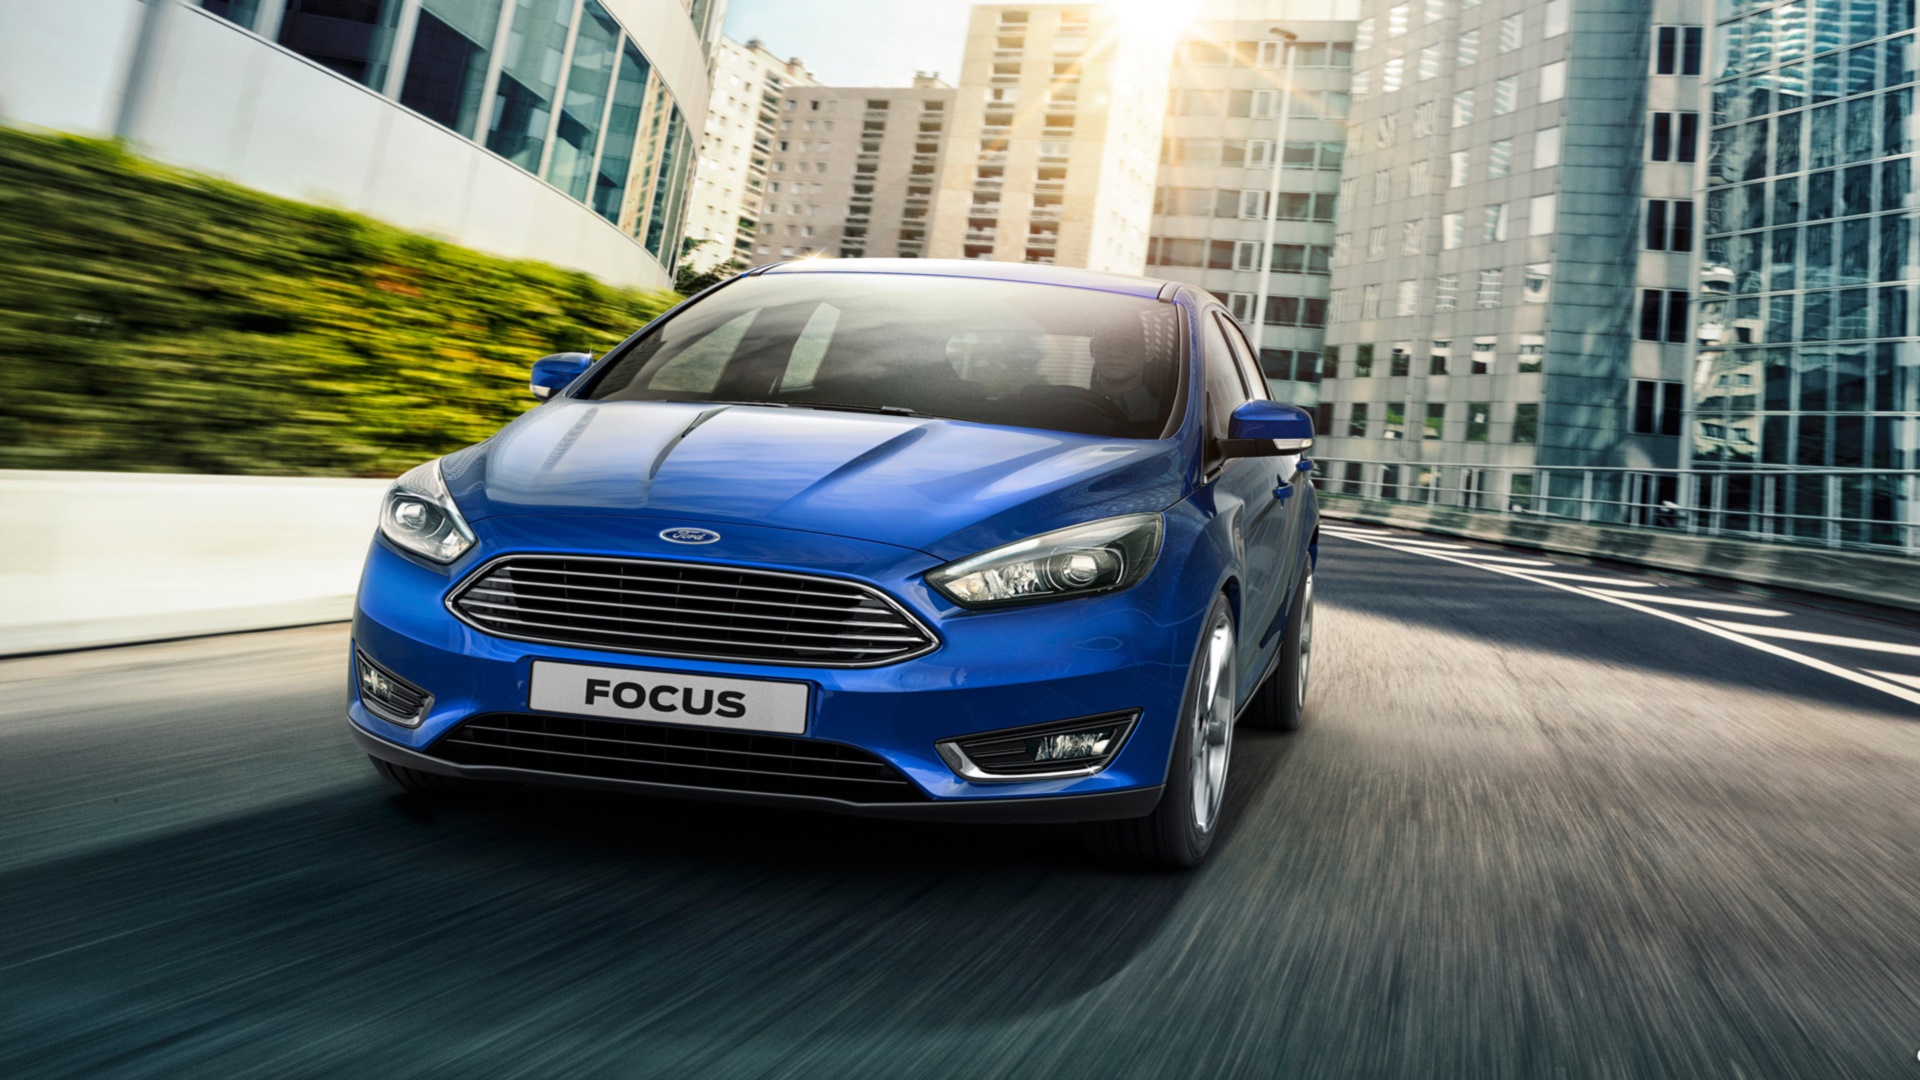 ford focus wallpaper,land vehicle,vehicle,car,ford motor company,automotive design